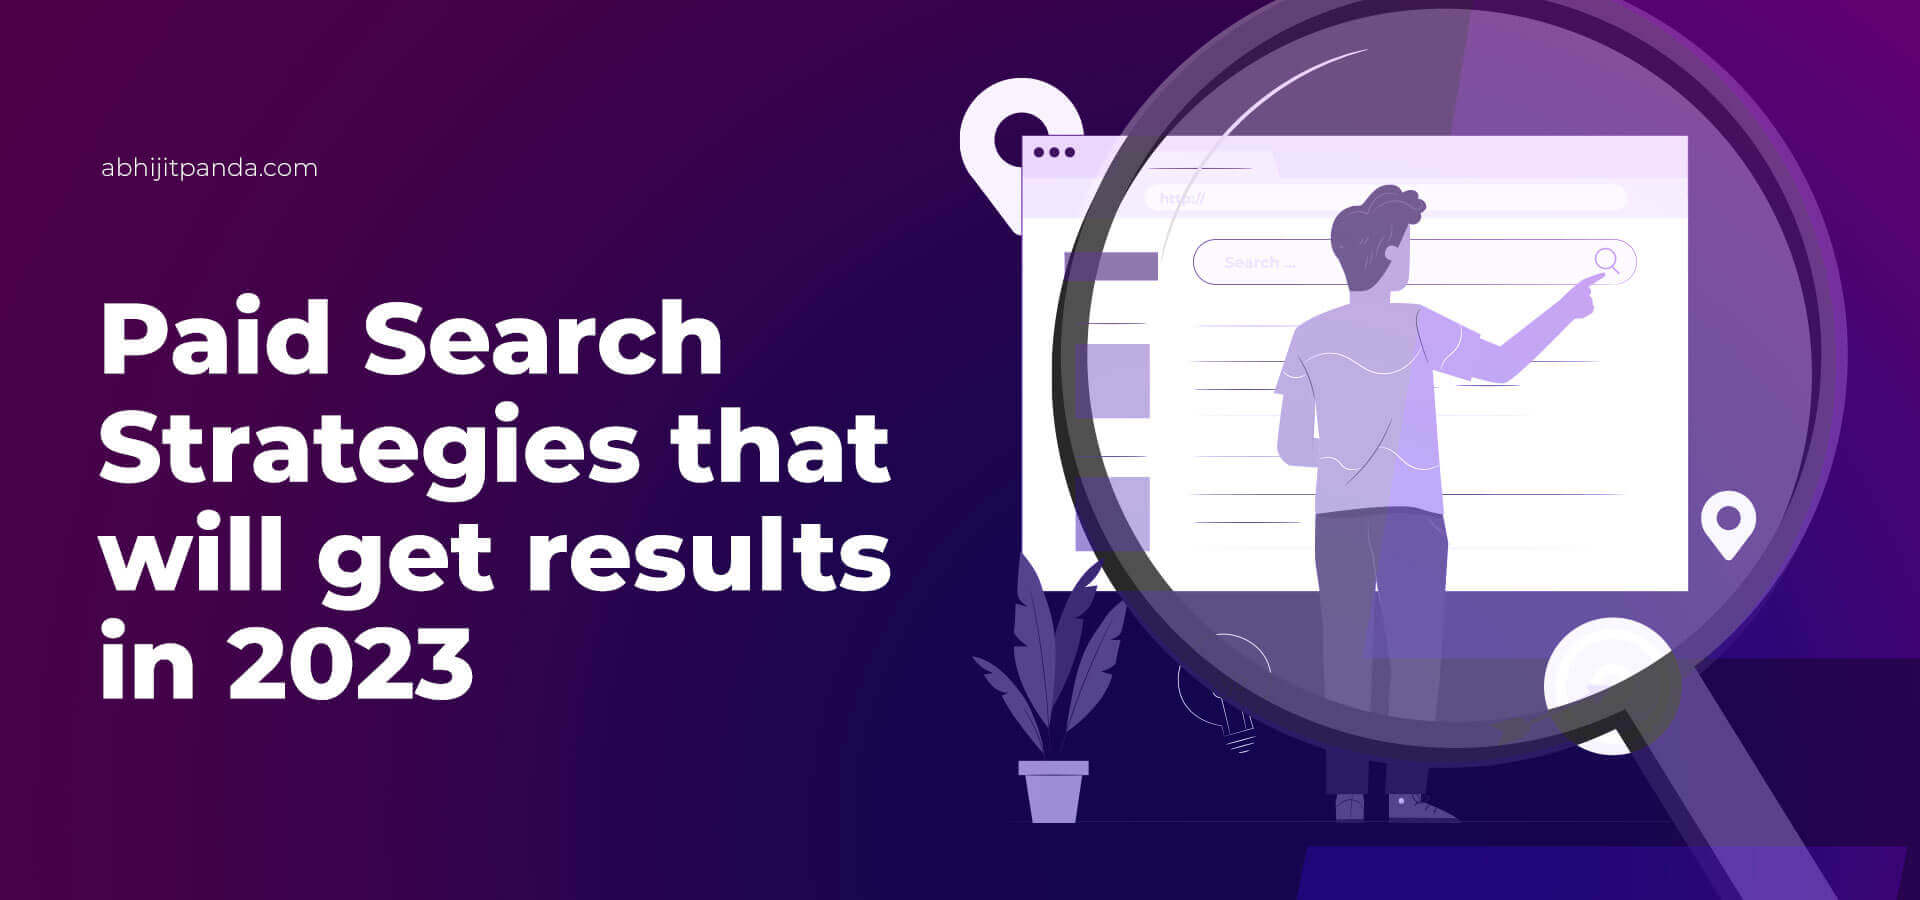 Paid Search Strategies that will get Results